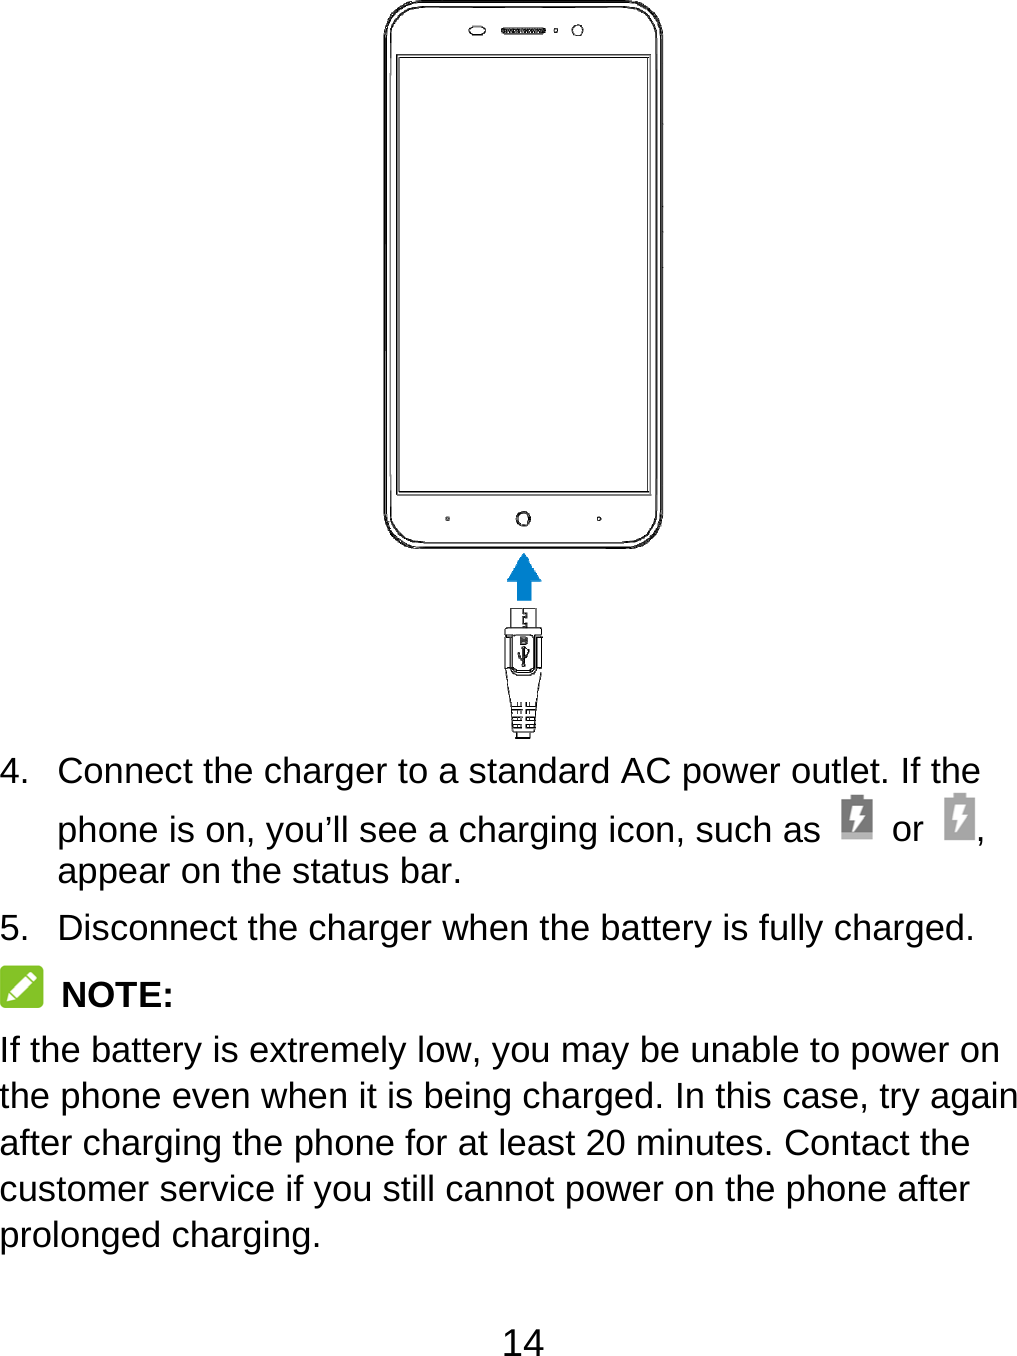 14  4.  Connect the charger to a standard AC power outlet. If the phone is on, you’ll see a charging icon, such as   or  , appear on the status bar. 5.  Disconnect the charger when the battery is fully charged.  NOTE: If the battery is extremely low, you may be unable to power on the phone even when it is being charged. In this case, try again after charging the phone for at least 20 minutes. Contact the customer service if you still cannot power on the phone after prolonged charging. 